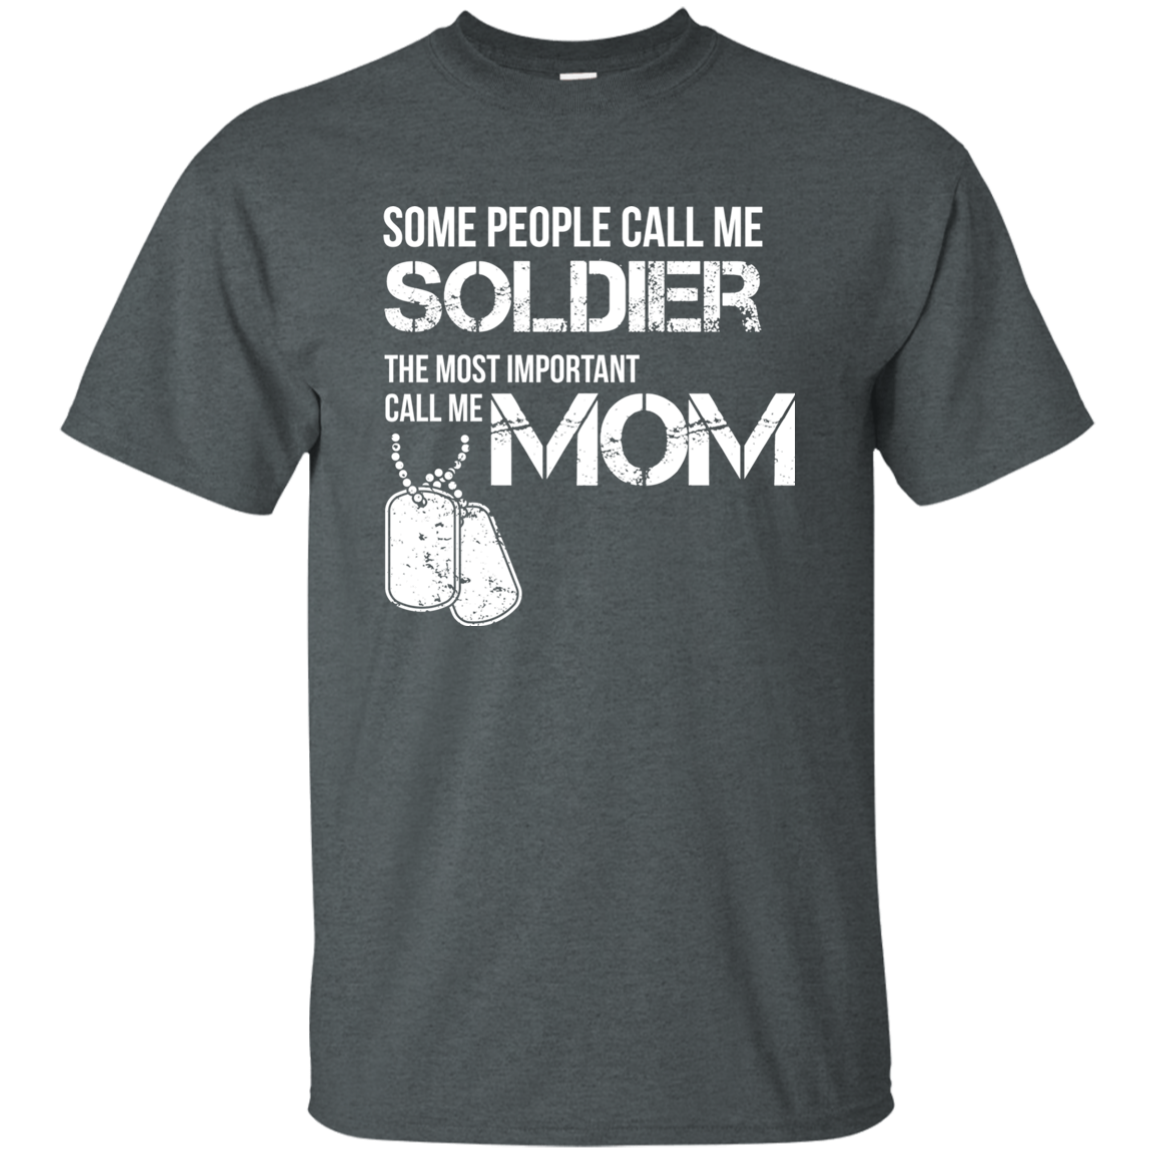 Some People Call Me Soldier Mom